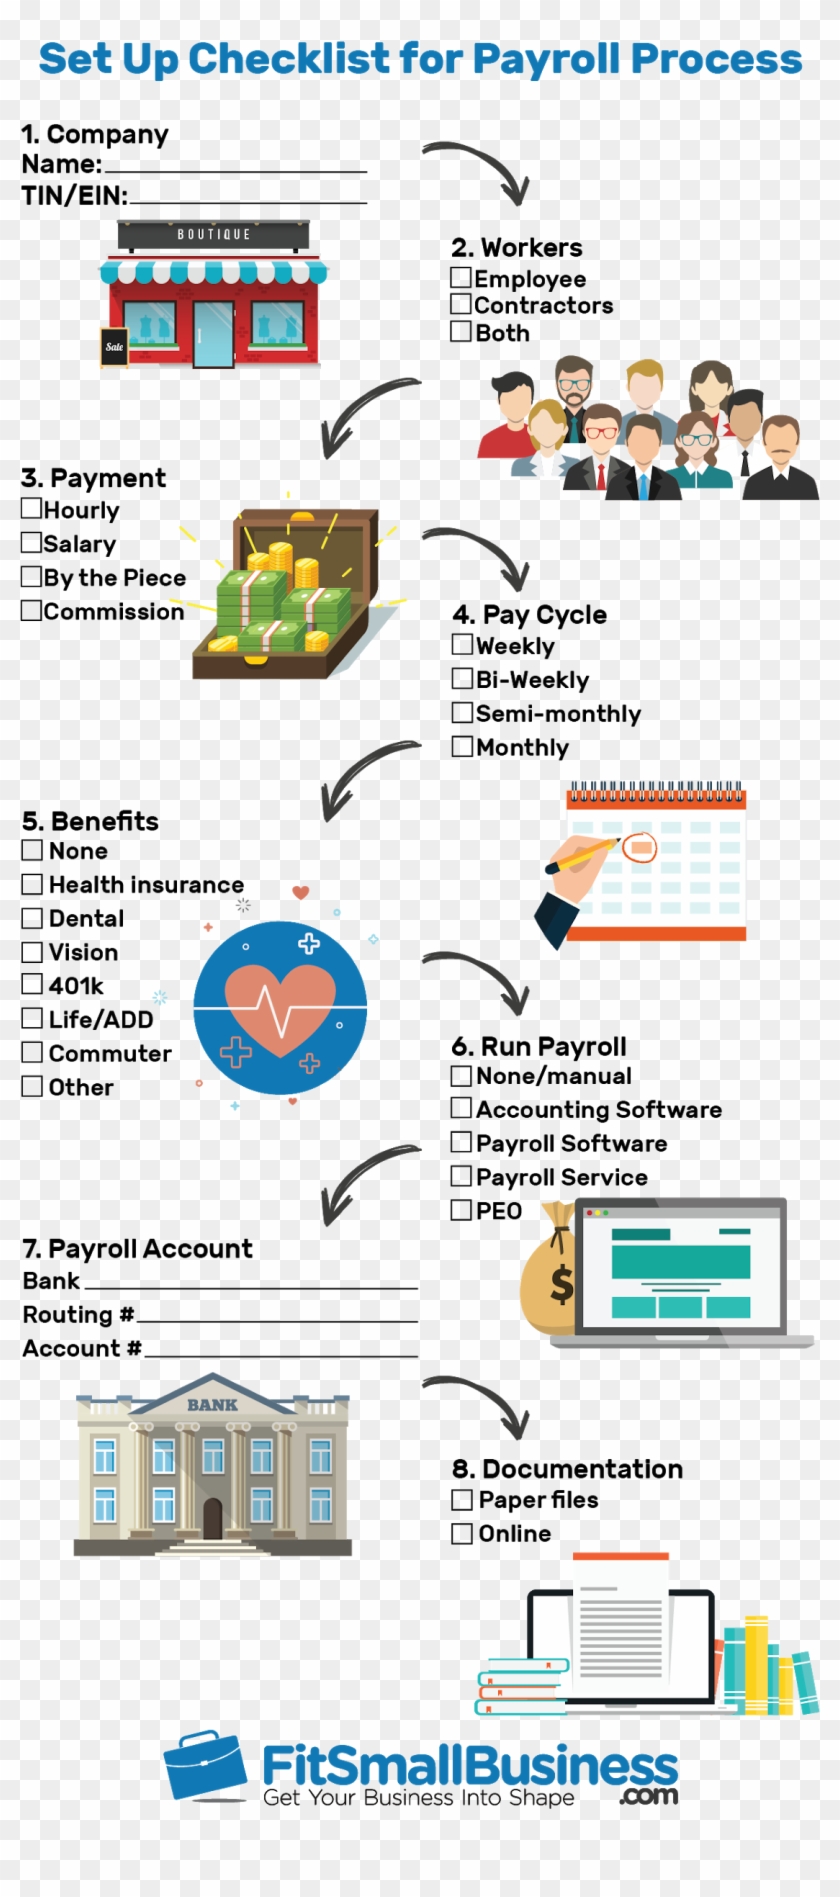 Eight Steps To Set Up Your Payroll Process - Process And Steps For Preparation For Payroll Clipart